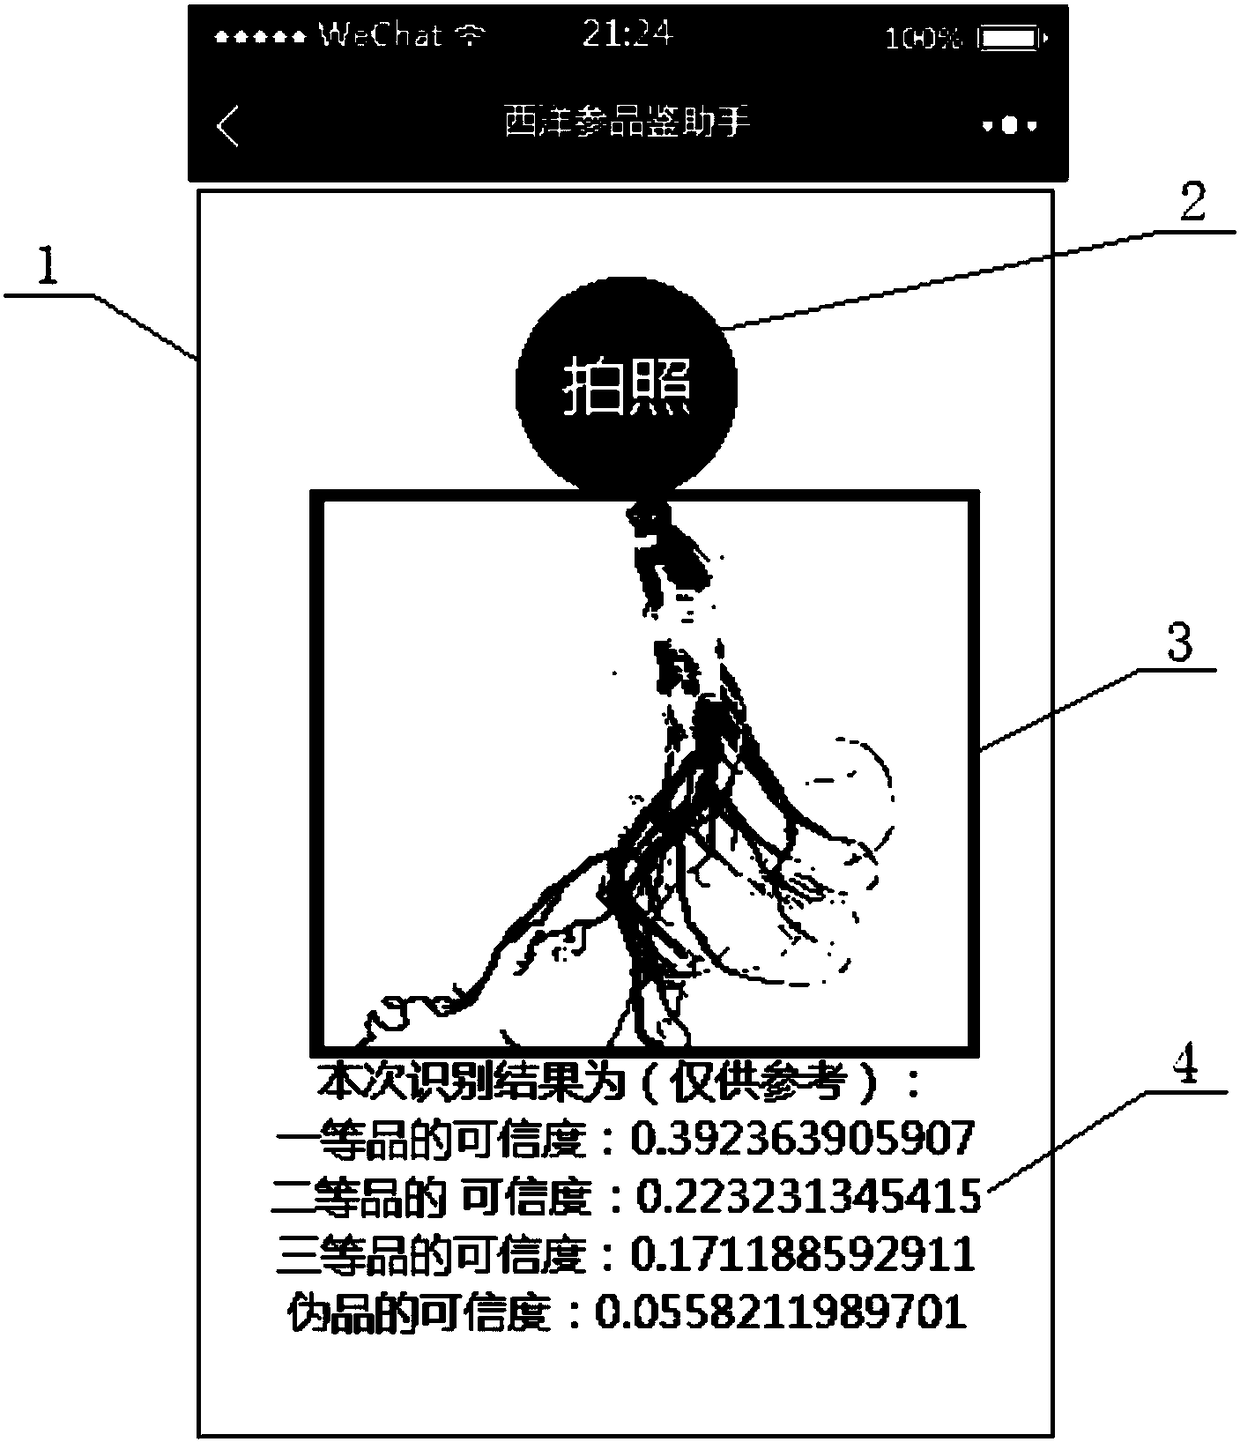 American ginseng quality identification assistant based on Wechat mini program and deep learning technology